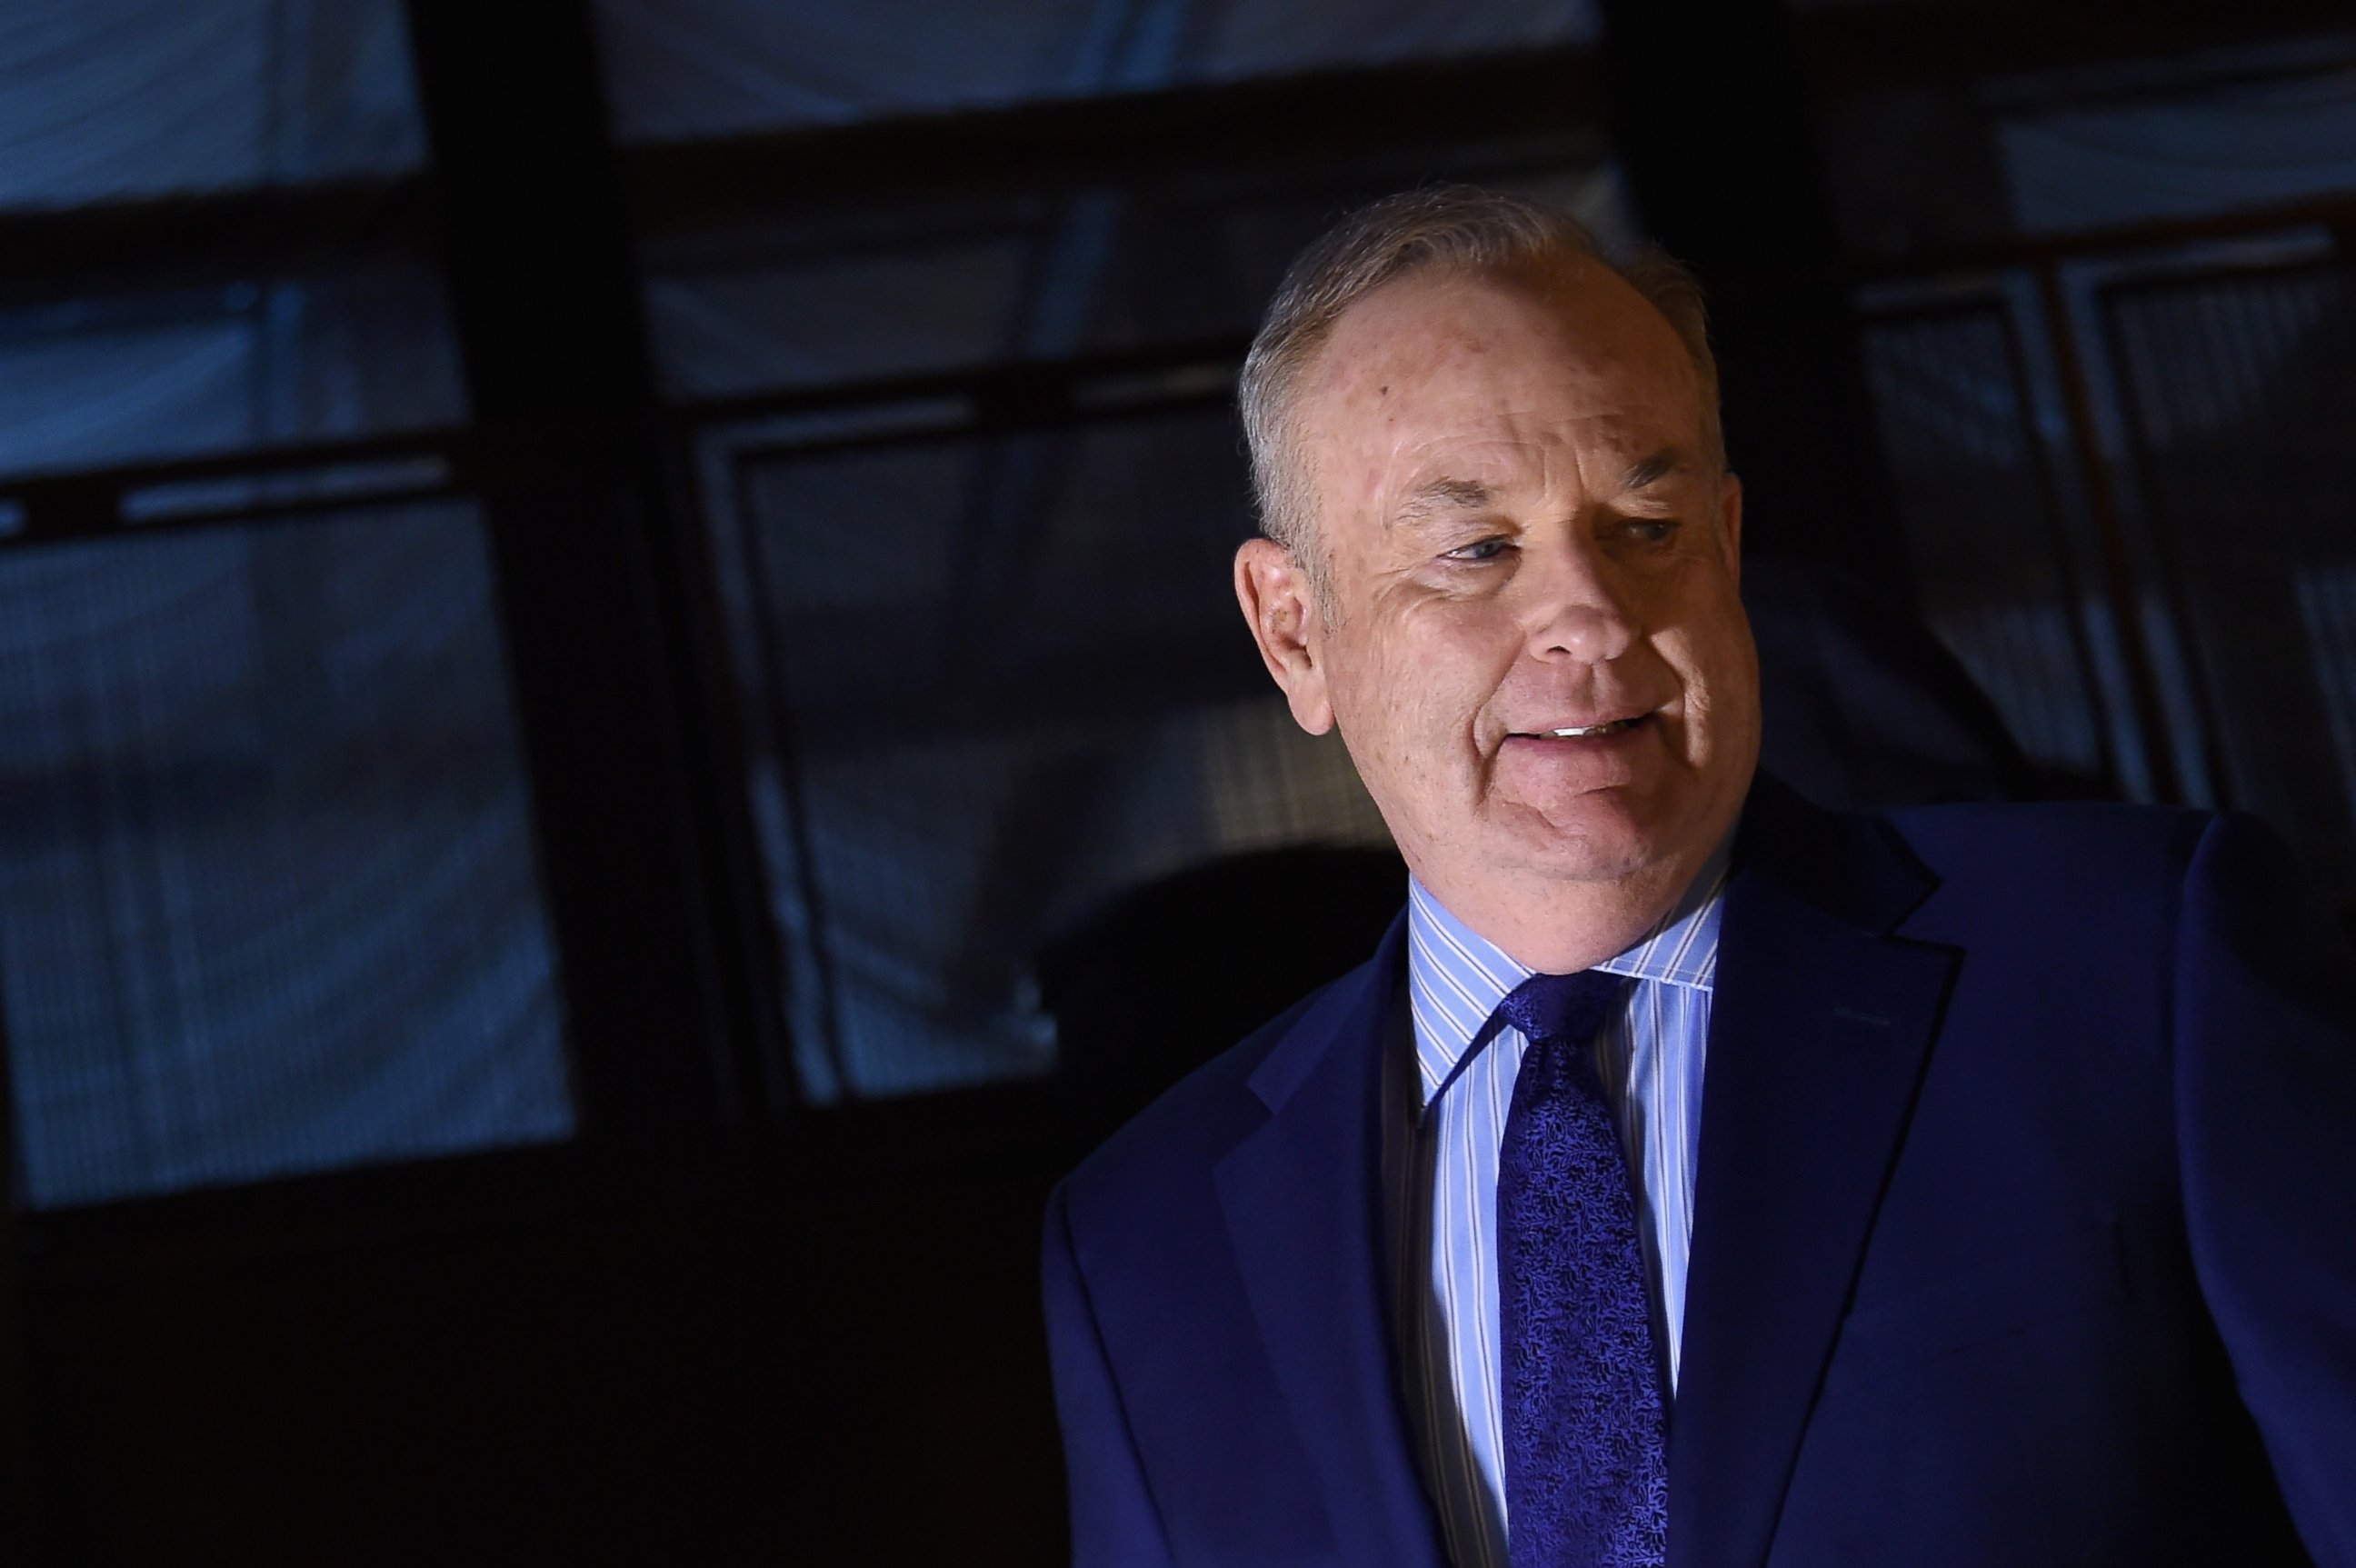 PHOTO: Bill O'Reilly attends the Hollywood Reporter's 2016 35 Most Powerful People in Media event on April 6, 2016 in New York.